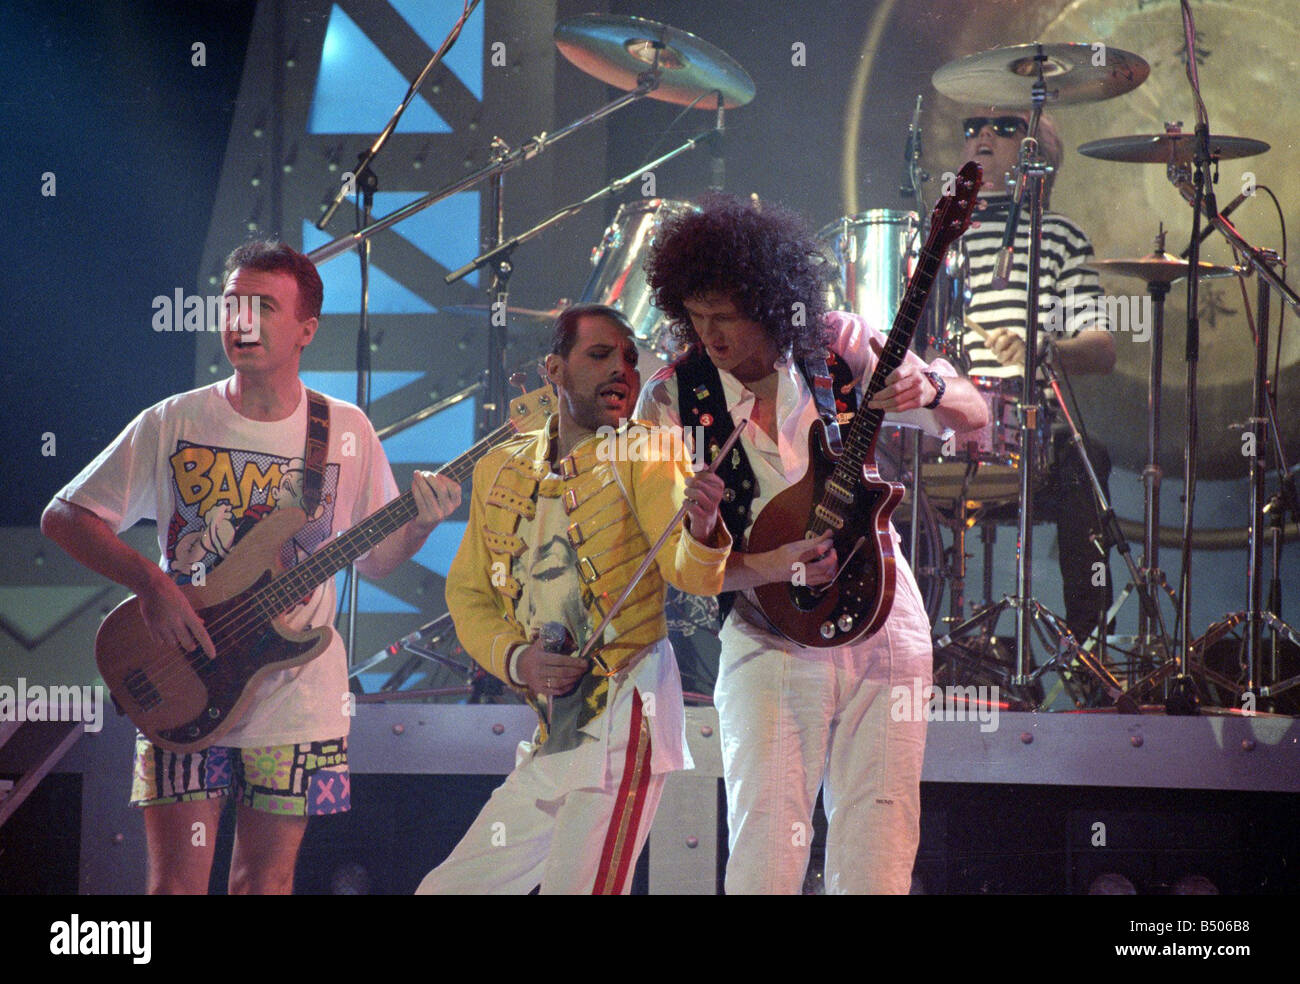 QUEEN FREDDIE MERCURY ON STAGE SINGING WITH THE BANDS GUITARIST PUBLICITY PHOTO 